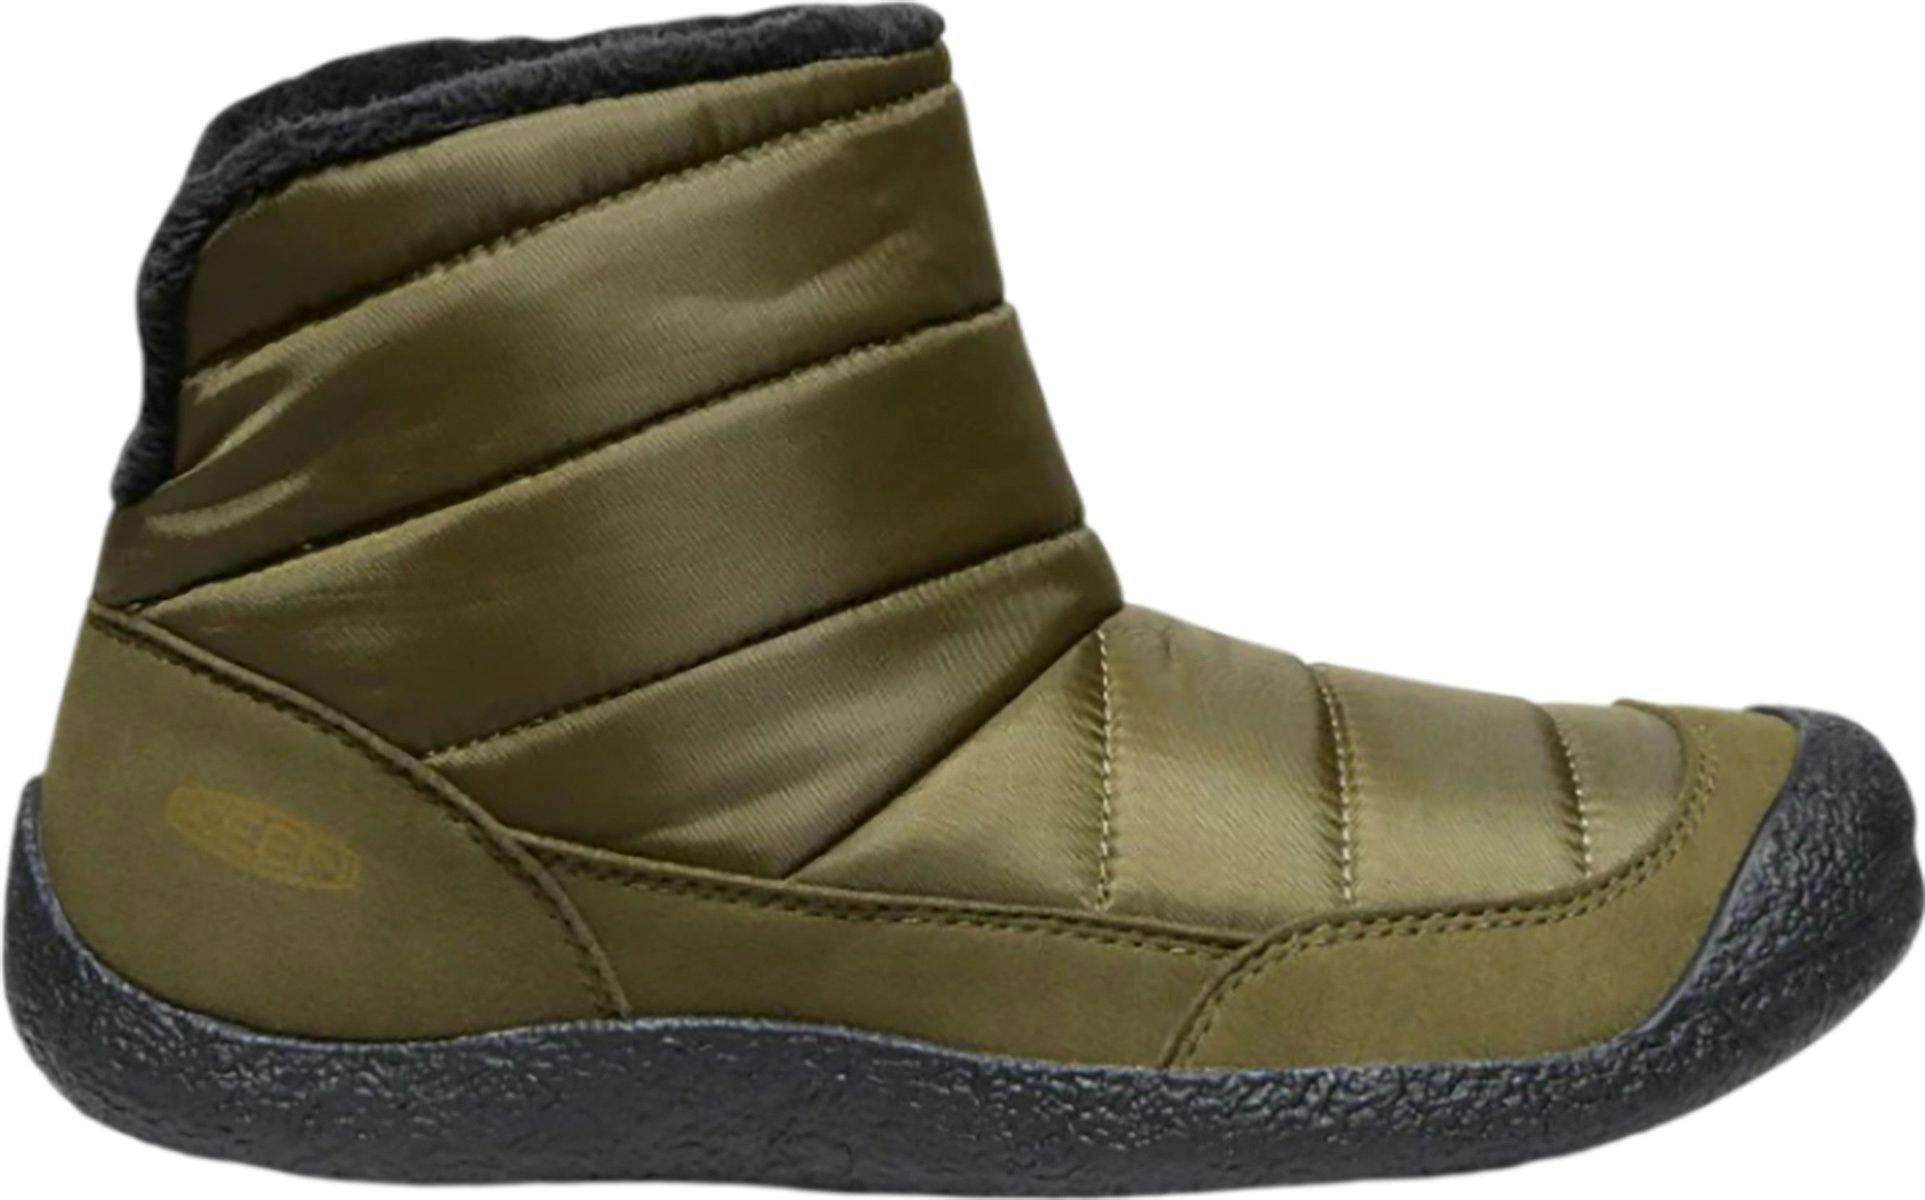 Product image for Howser Fold Down Winter Boots - Men's